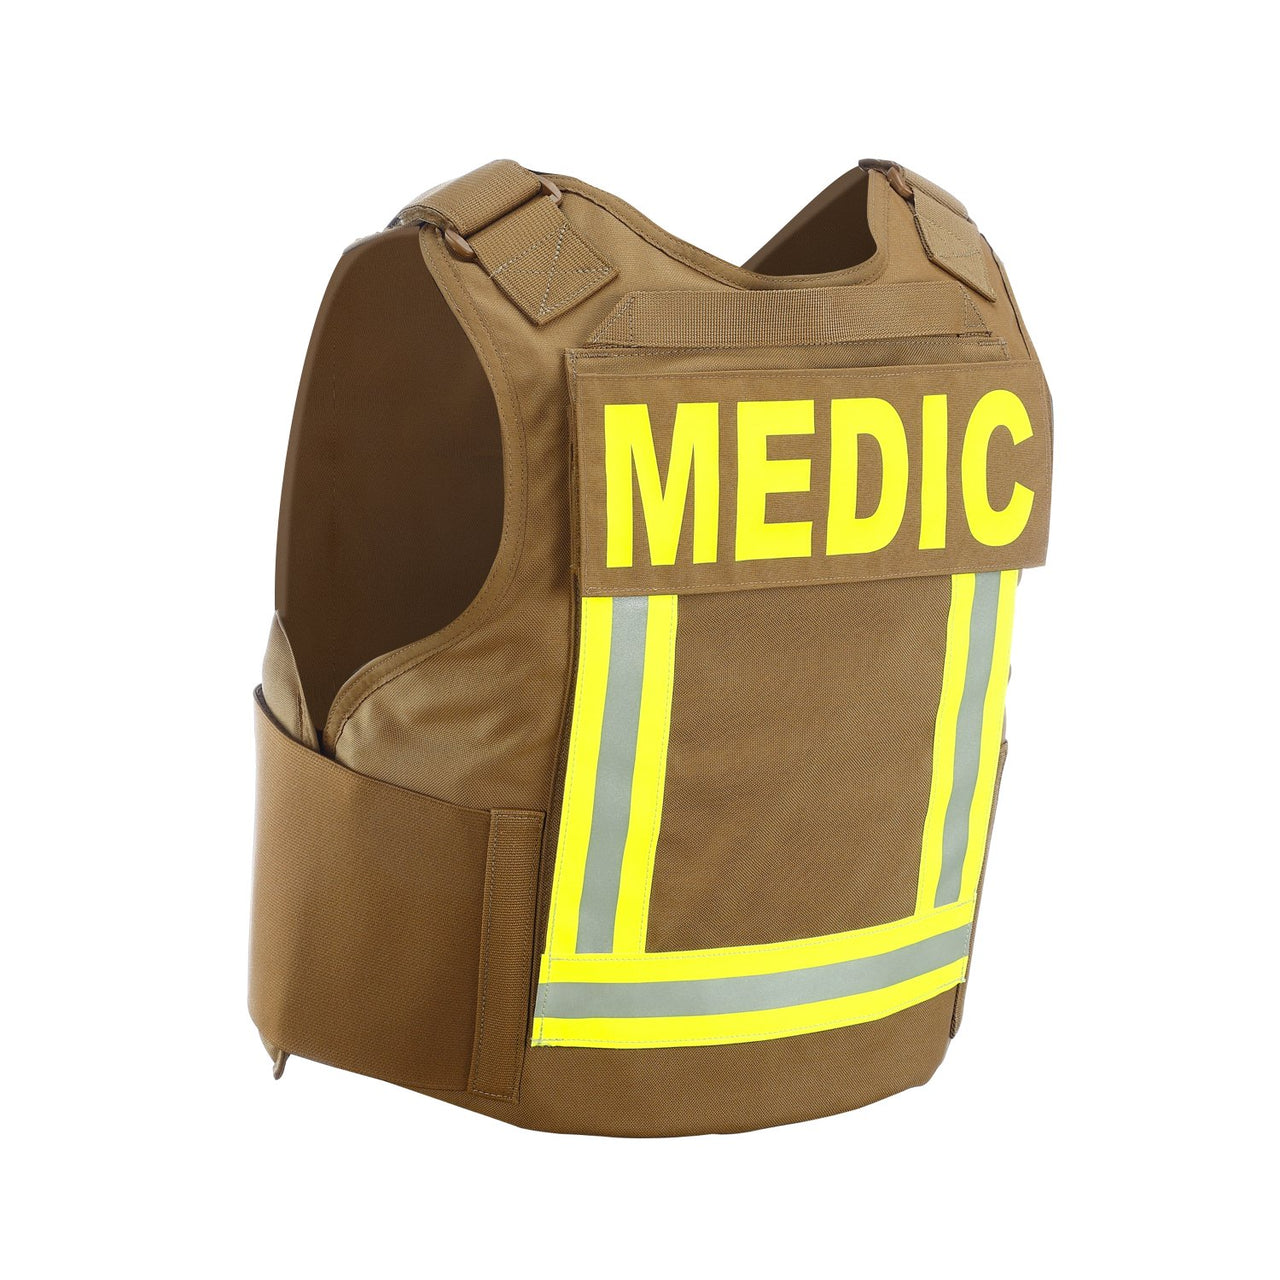 A Body Armor Direct Fireman Tactical Multi-Threat vest with the word Medic on it.